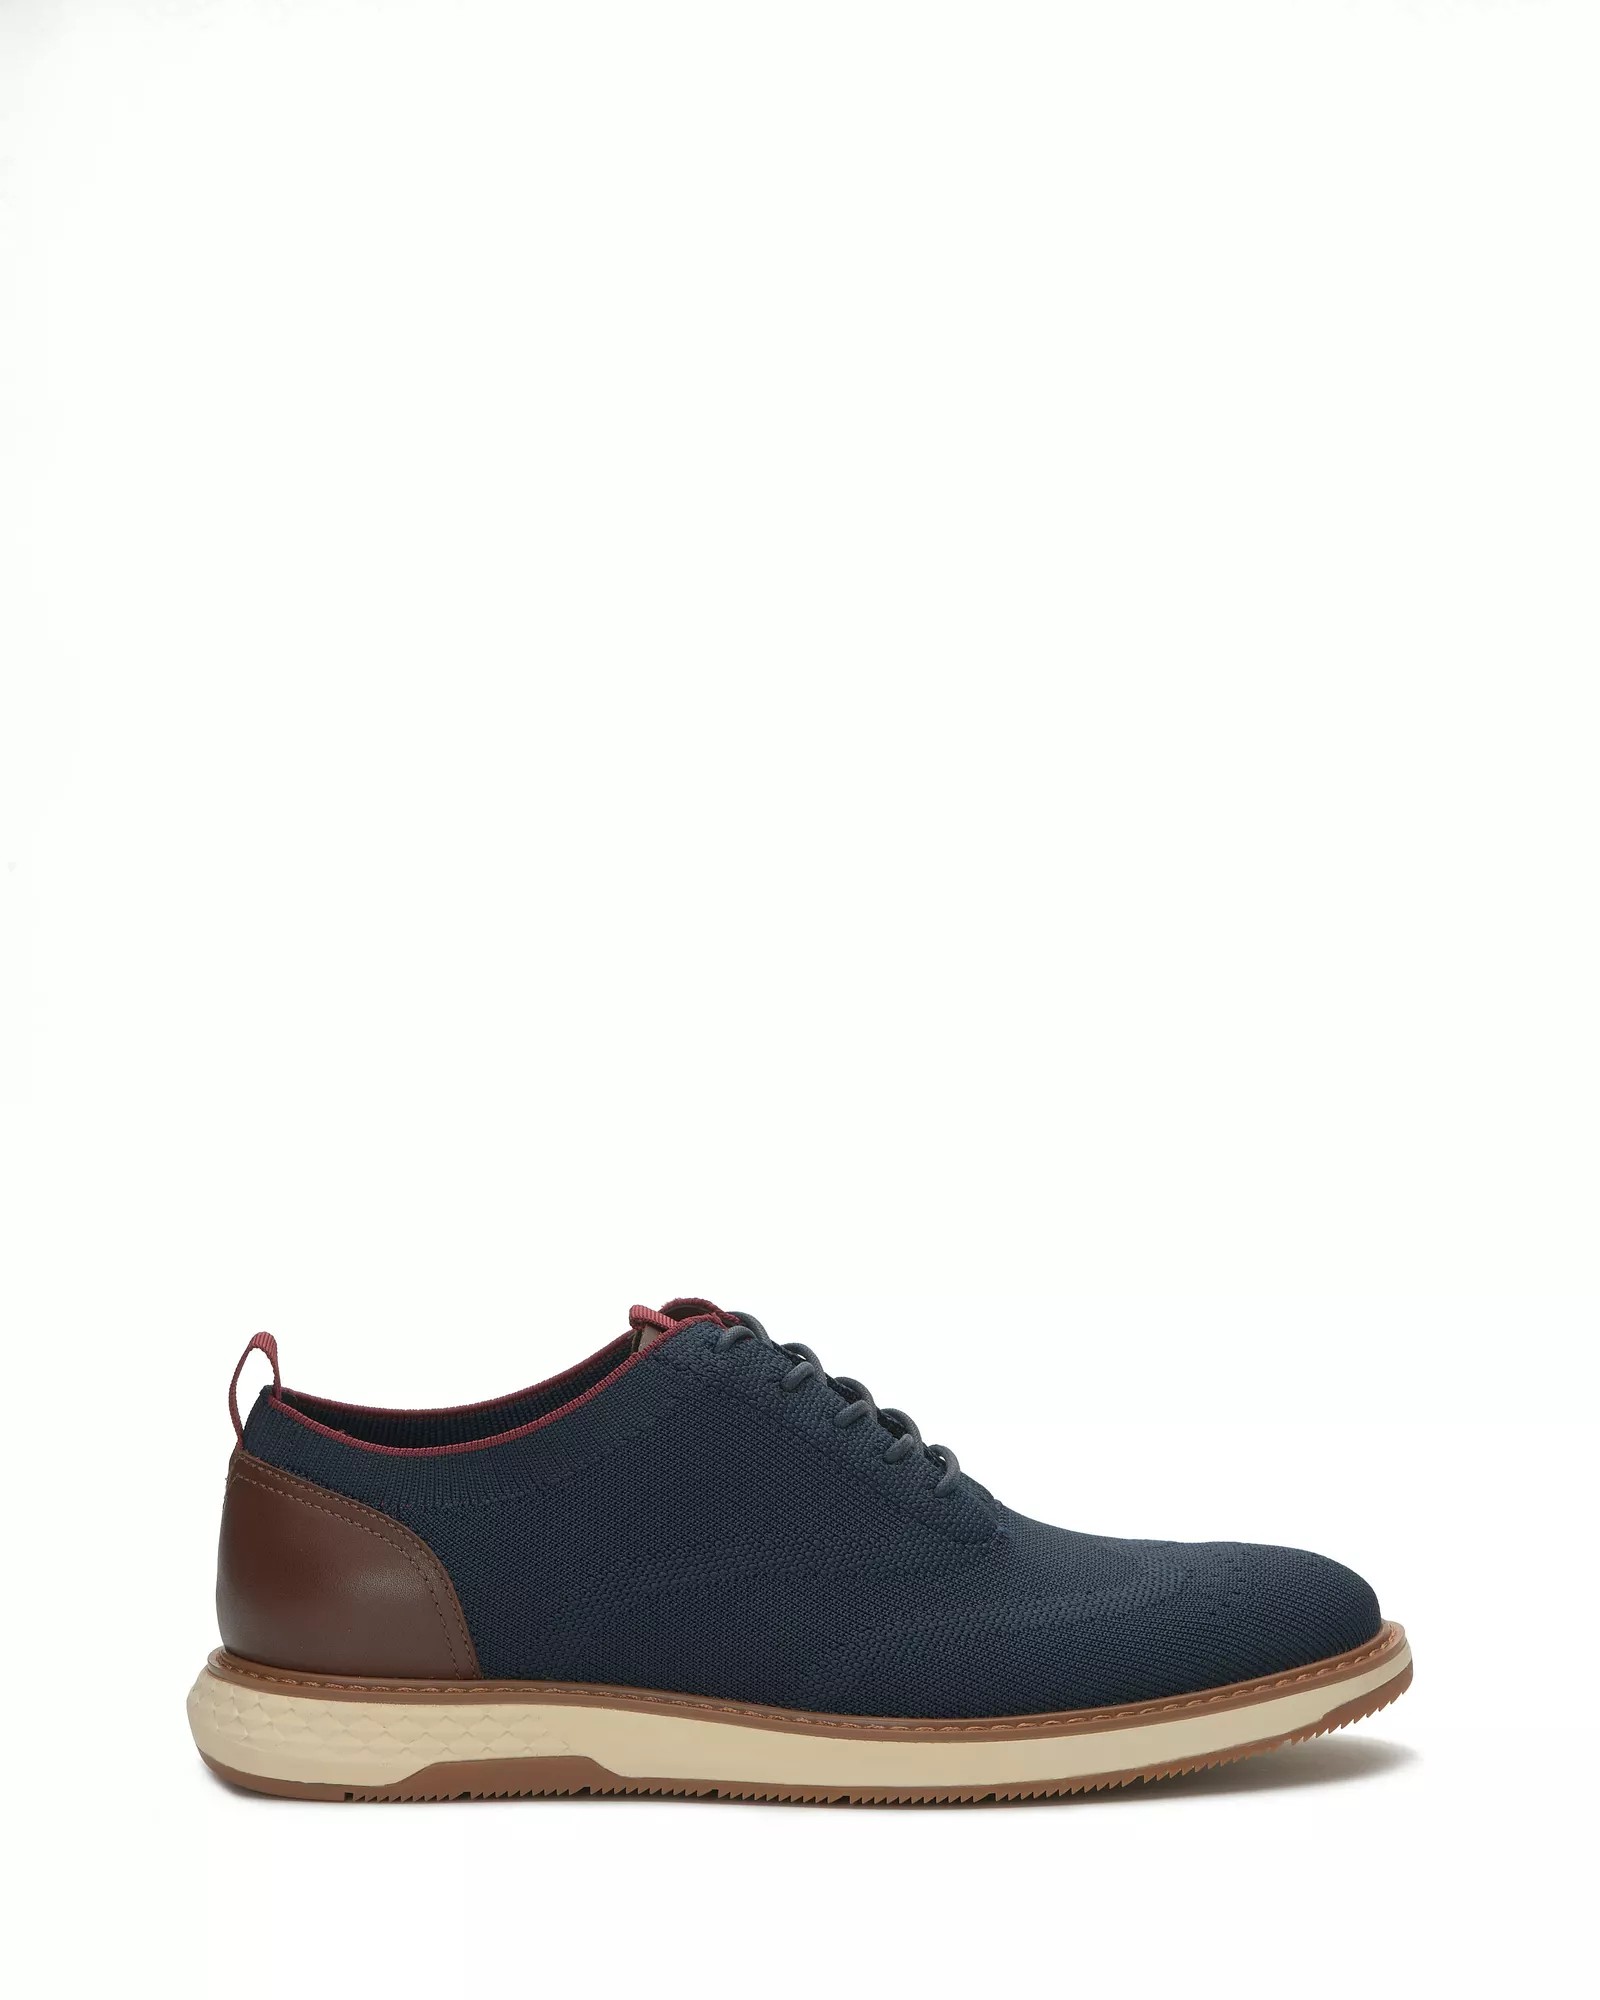 Vince Camuto Men's Staan Oxford